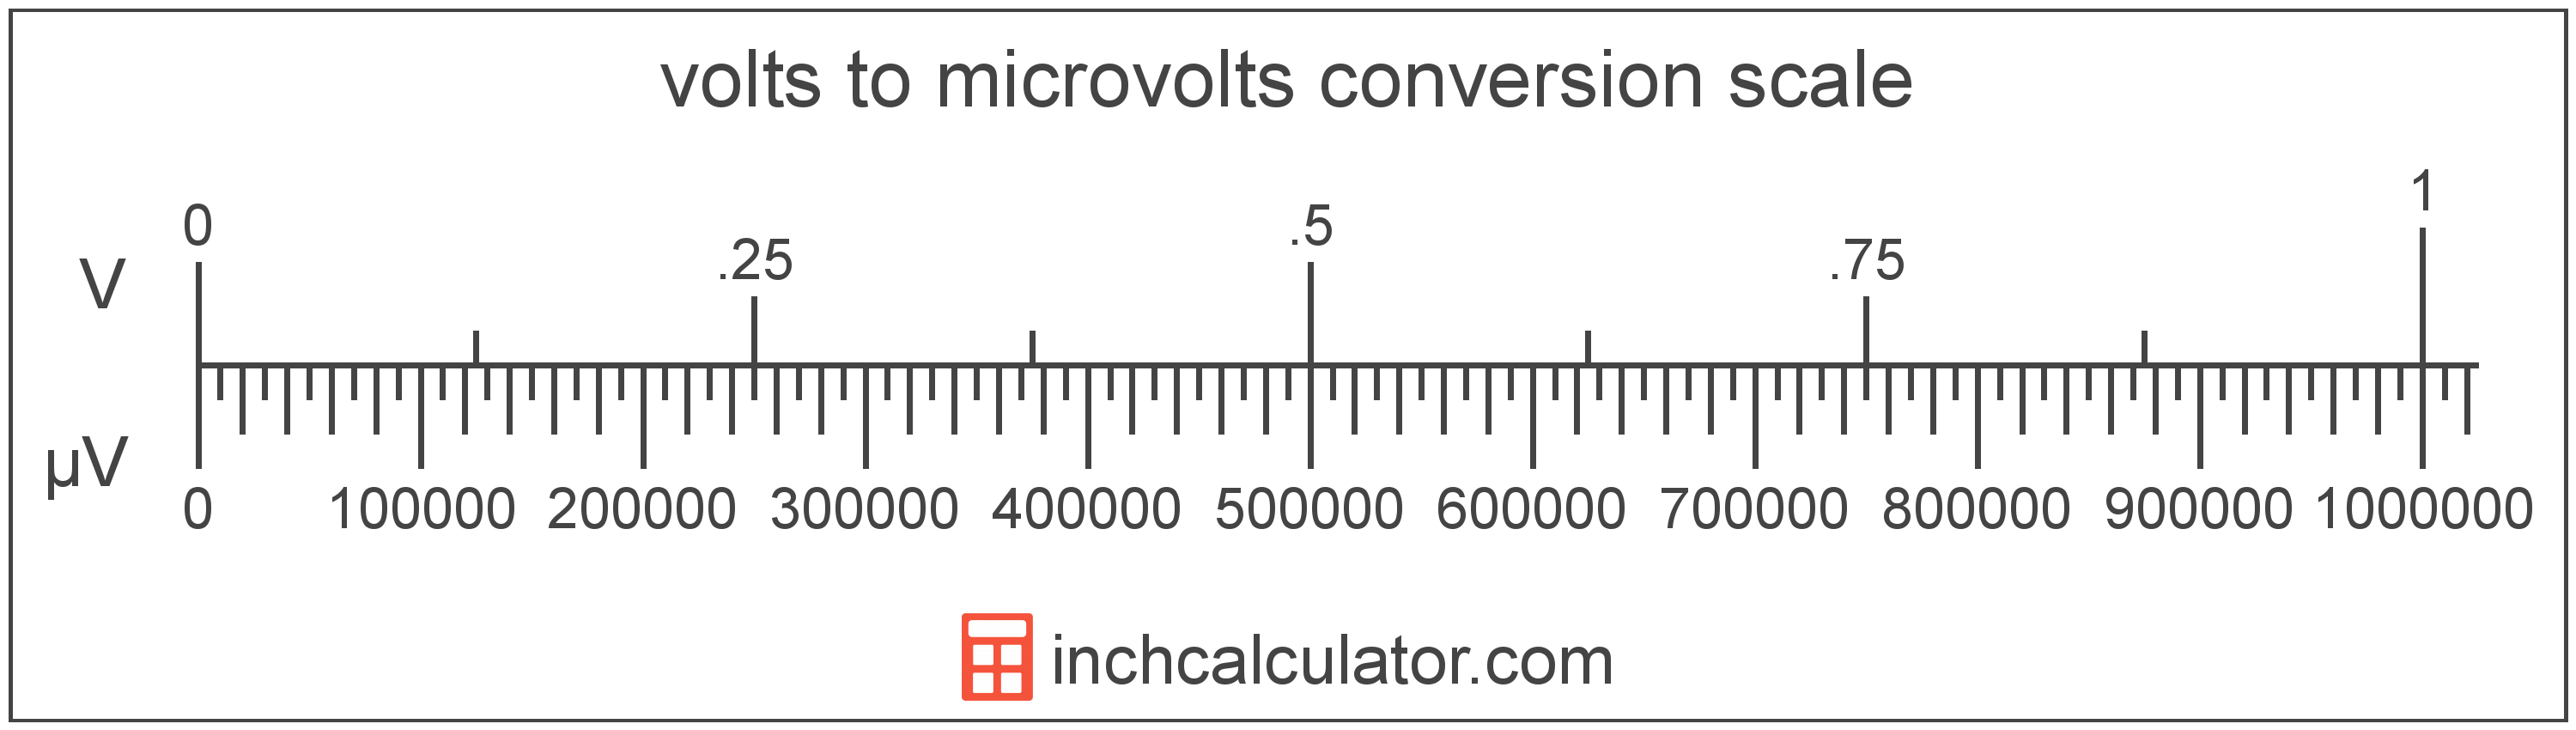 conversion scale showing volts and equivalent microvolts voltage values